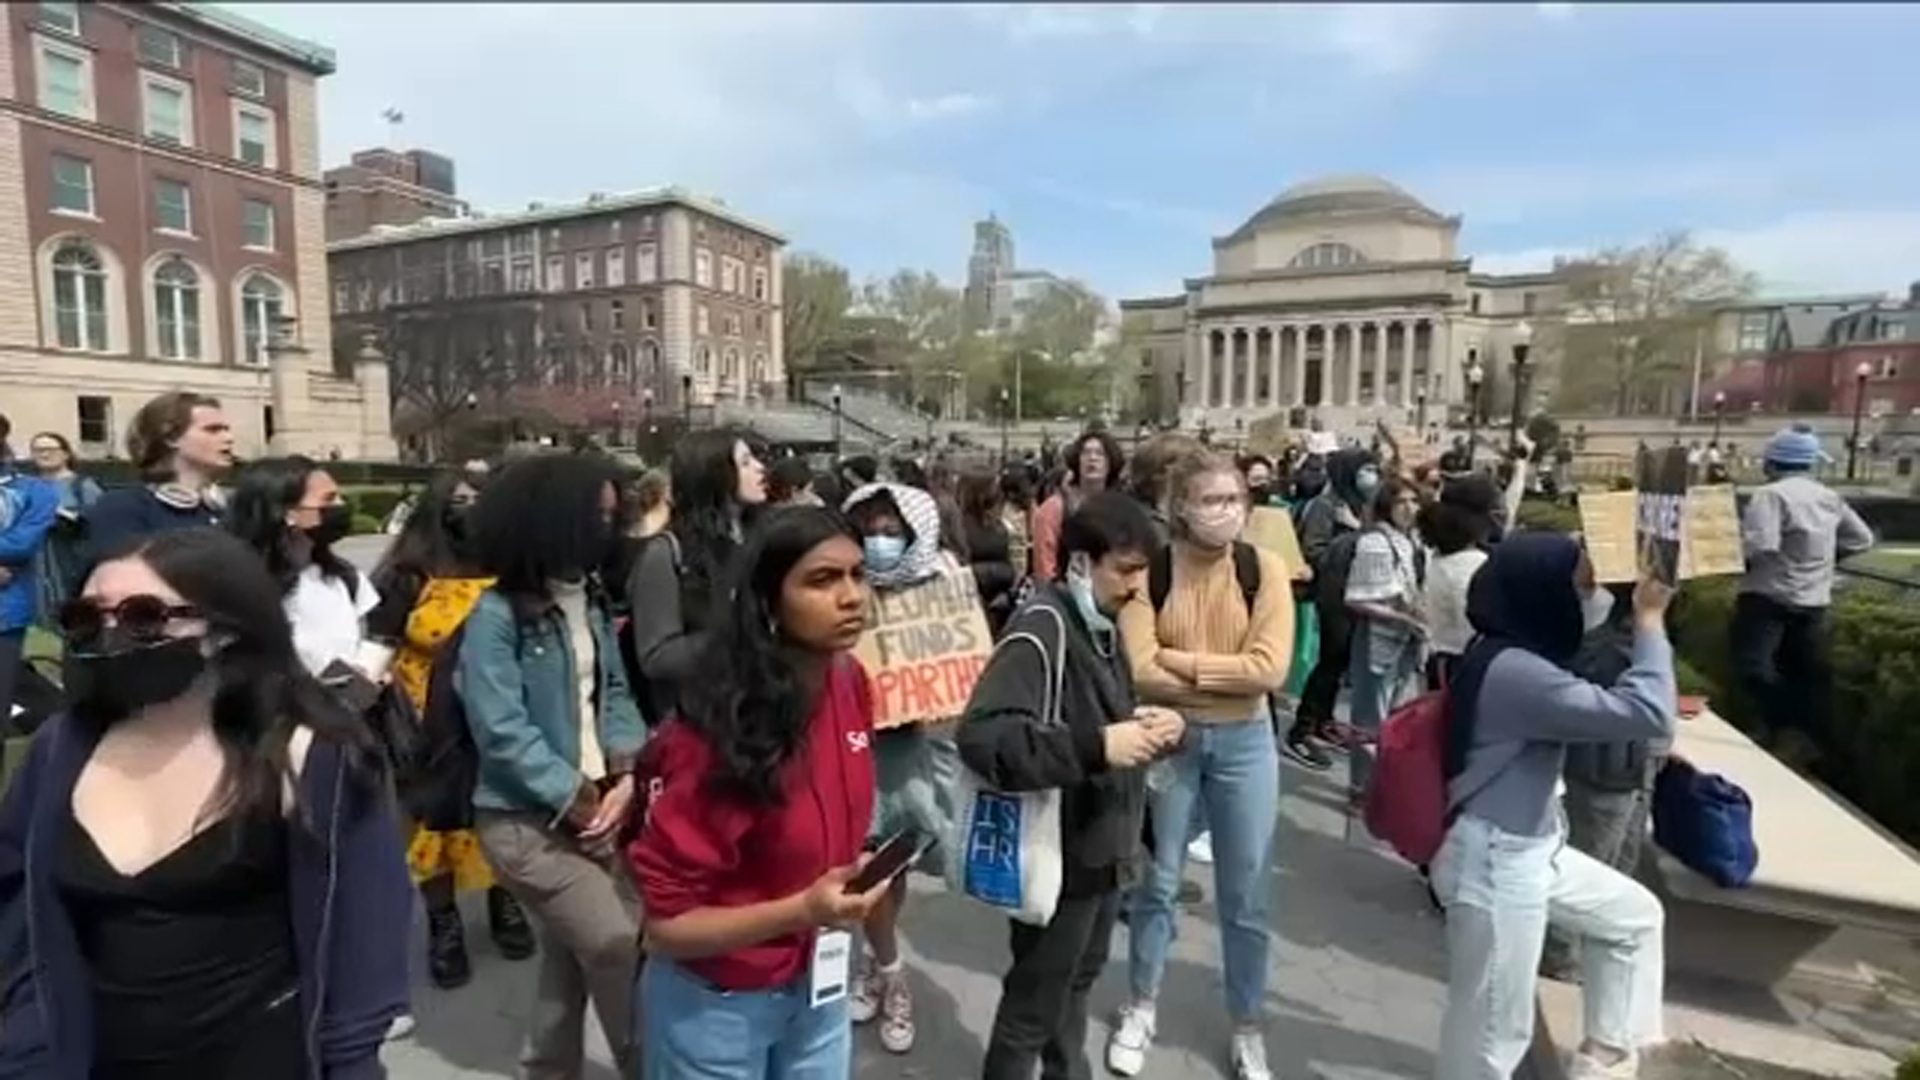 columbia-university’s-president-rebuts-claims-she-has-allowed-school-to-become-a-hotbed-of-hatred